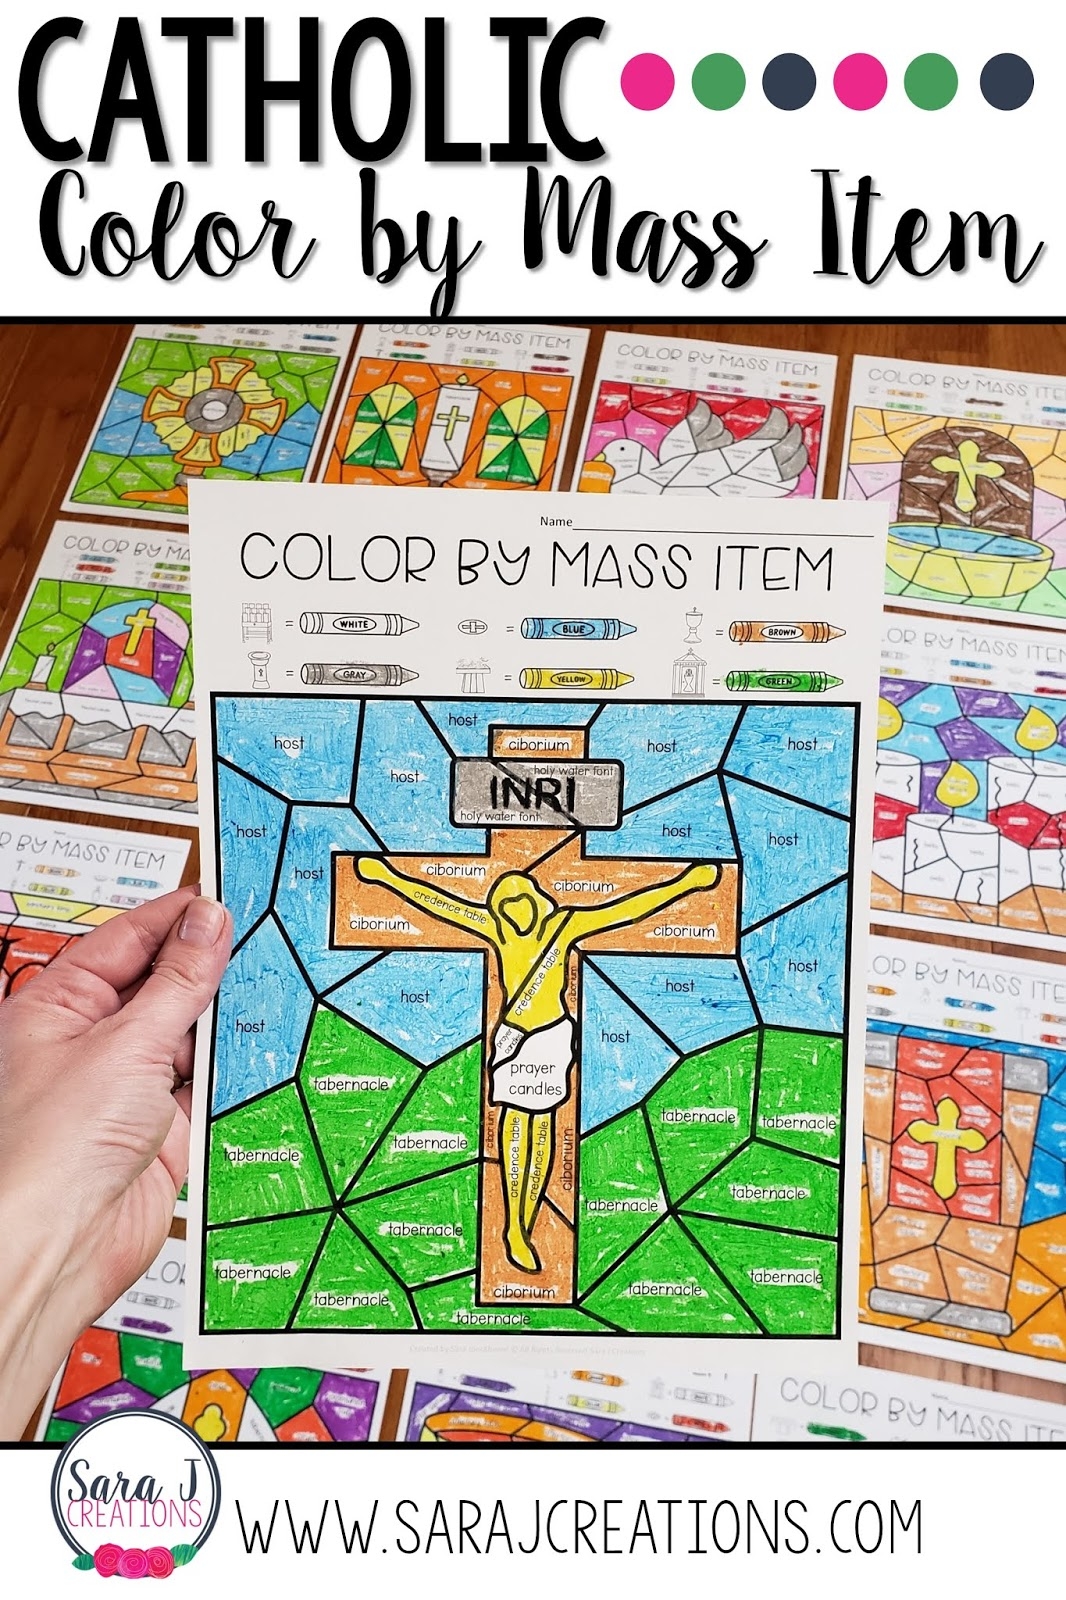 Catholic Color By Mass Item Coloring Pages Sara J Creations - Free Printable Catholic Mass Book